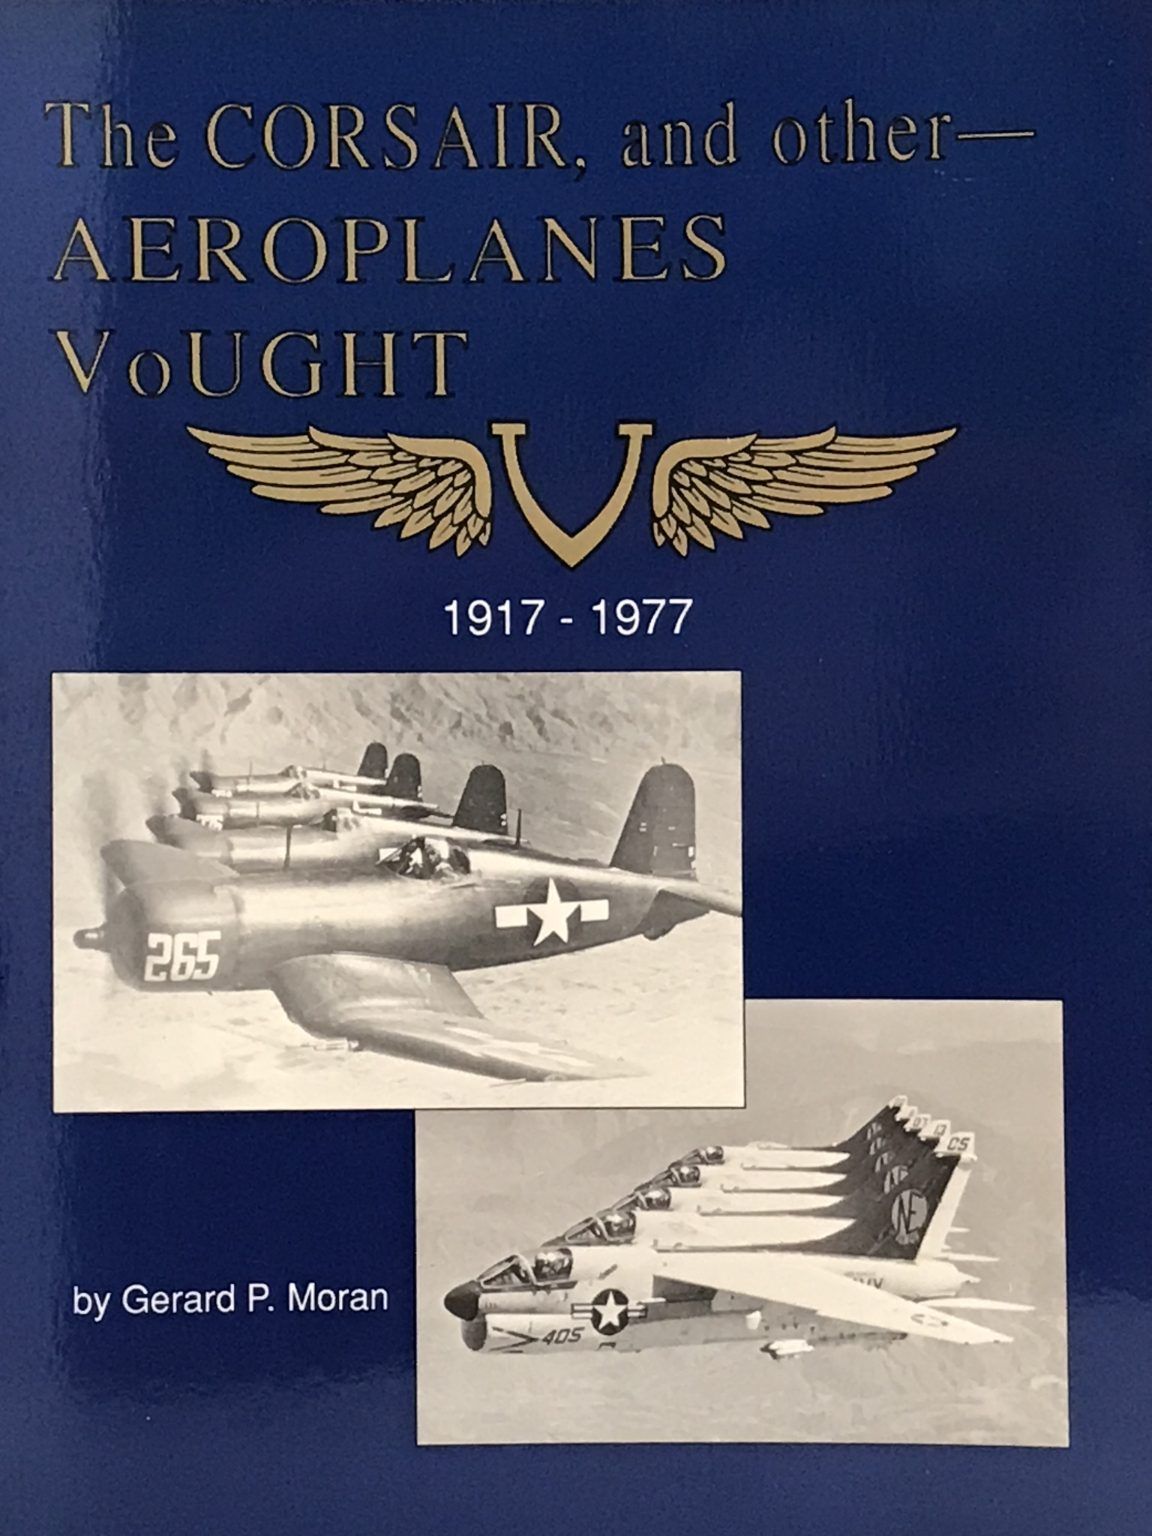 THE CORSAIR and other AEROPLANES: Vought 1917-1977